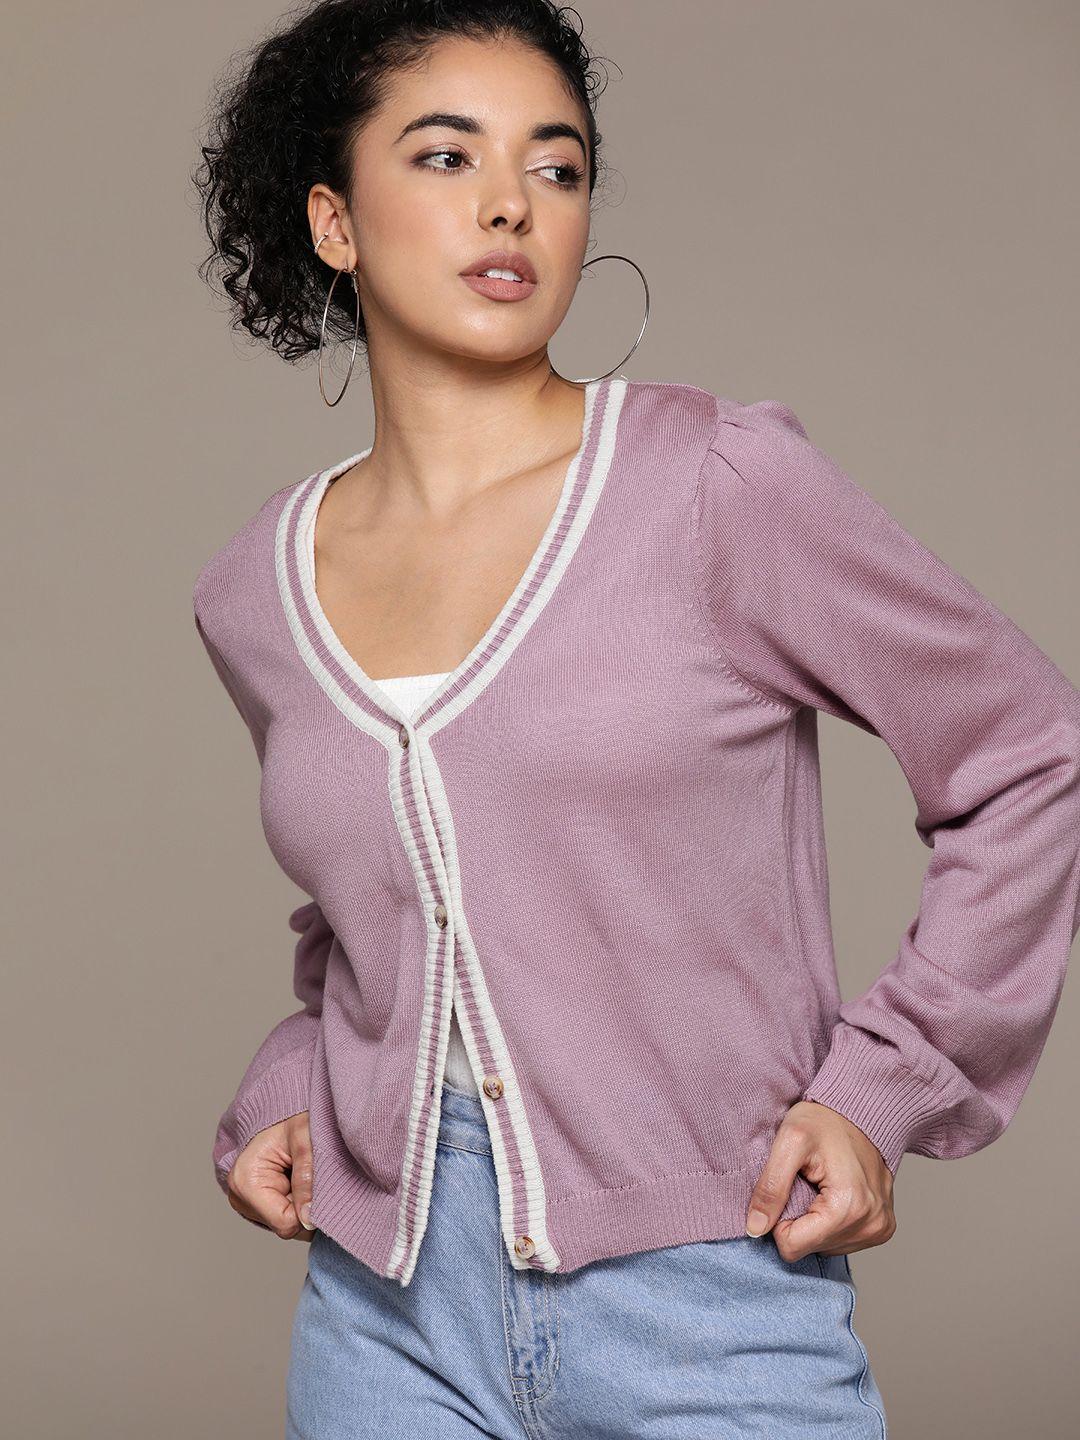 the roadster lifestyle co. contrast tipping pure acrylic cardigan